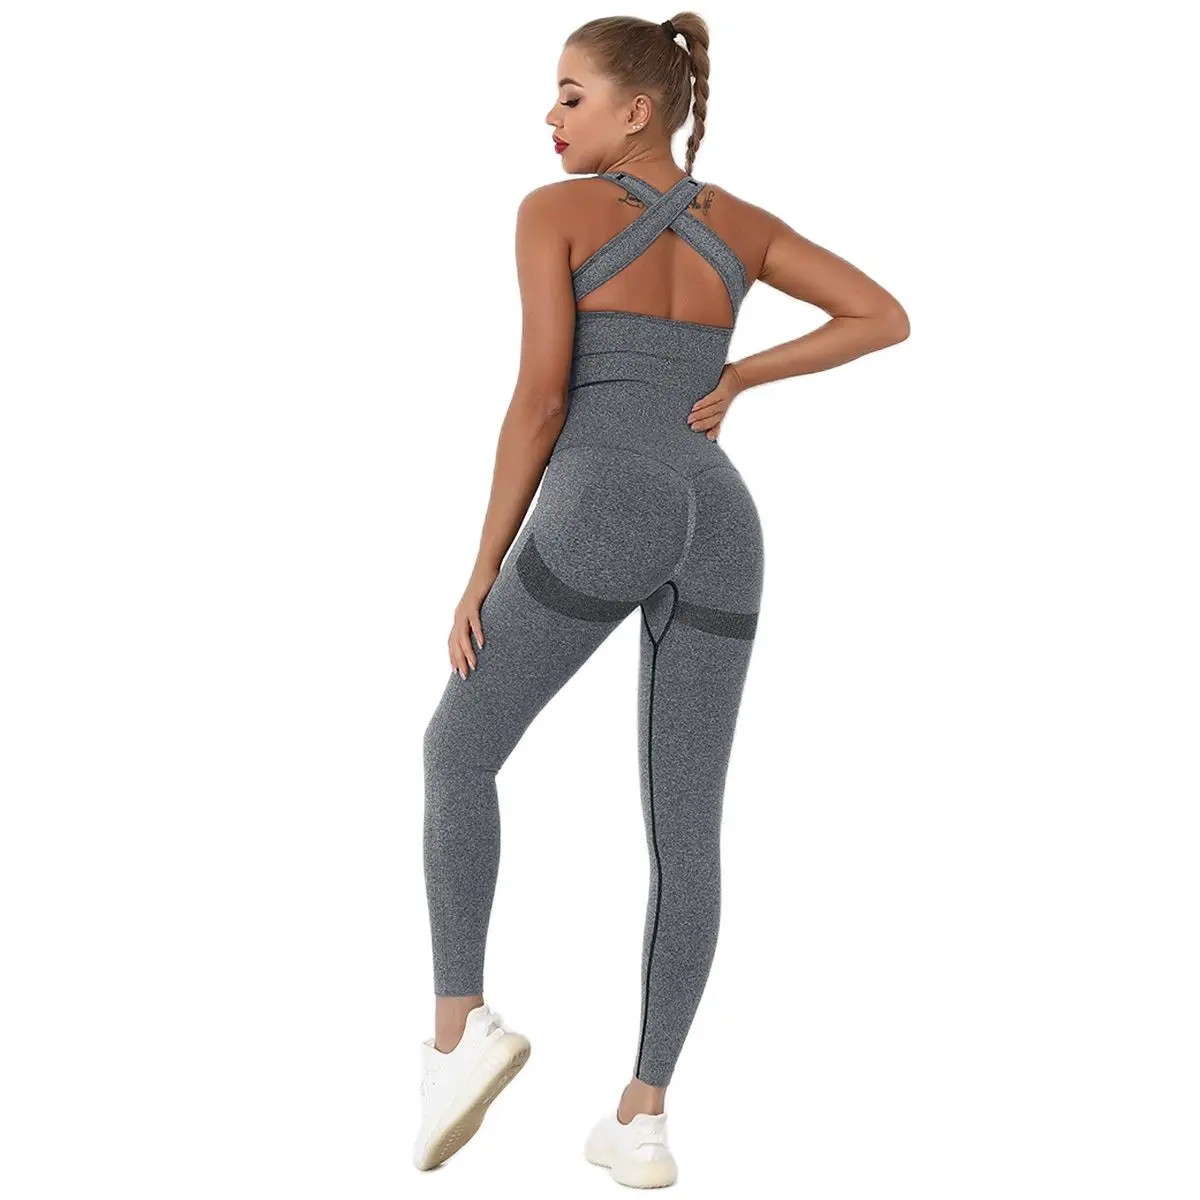 Sexy Beauty Back Yoga One-piece Tight-fitting Fitness Yoga Suit Women Sports Running Junpsuit Workout Yoga Sets Sport Jumpsuit